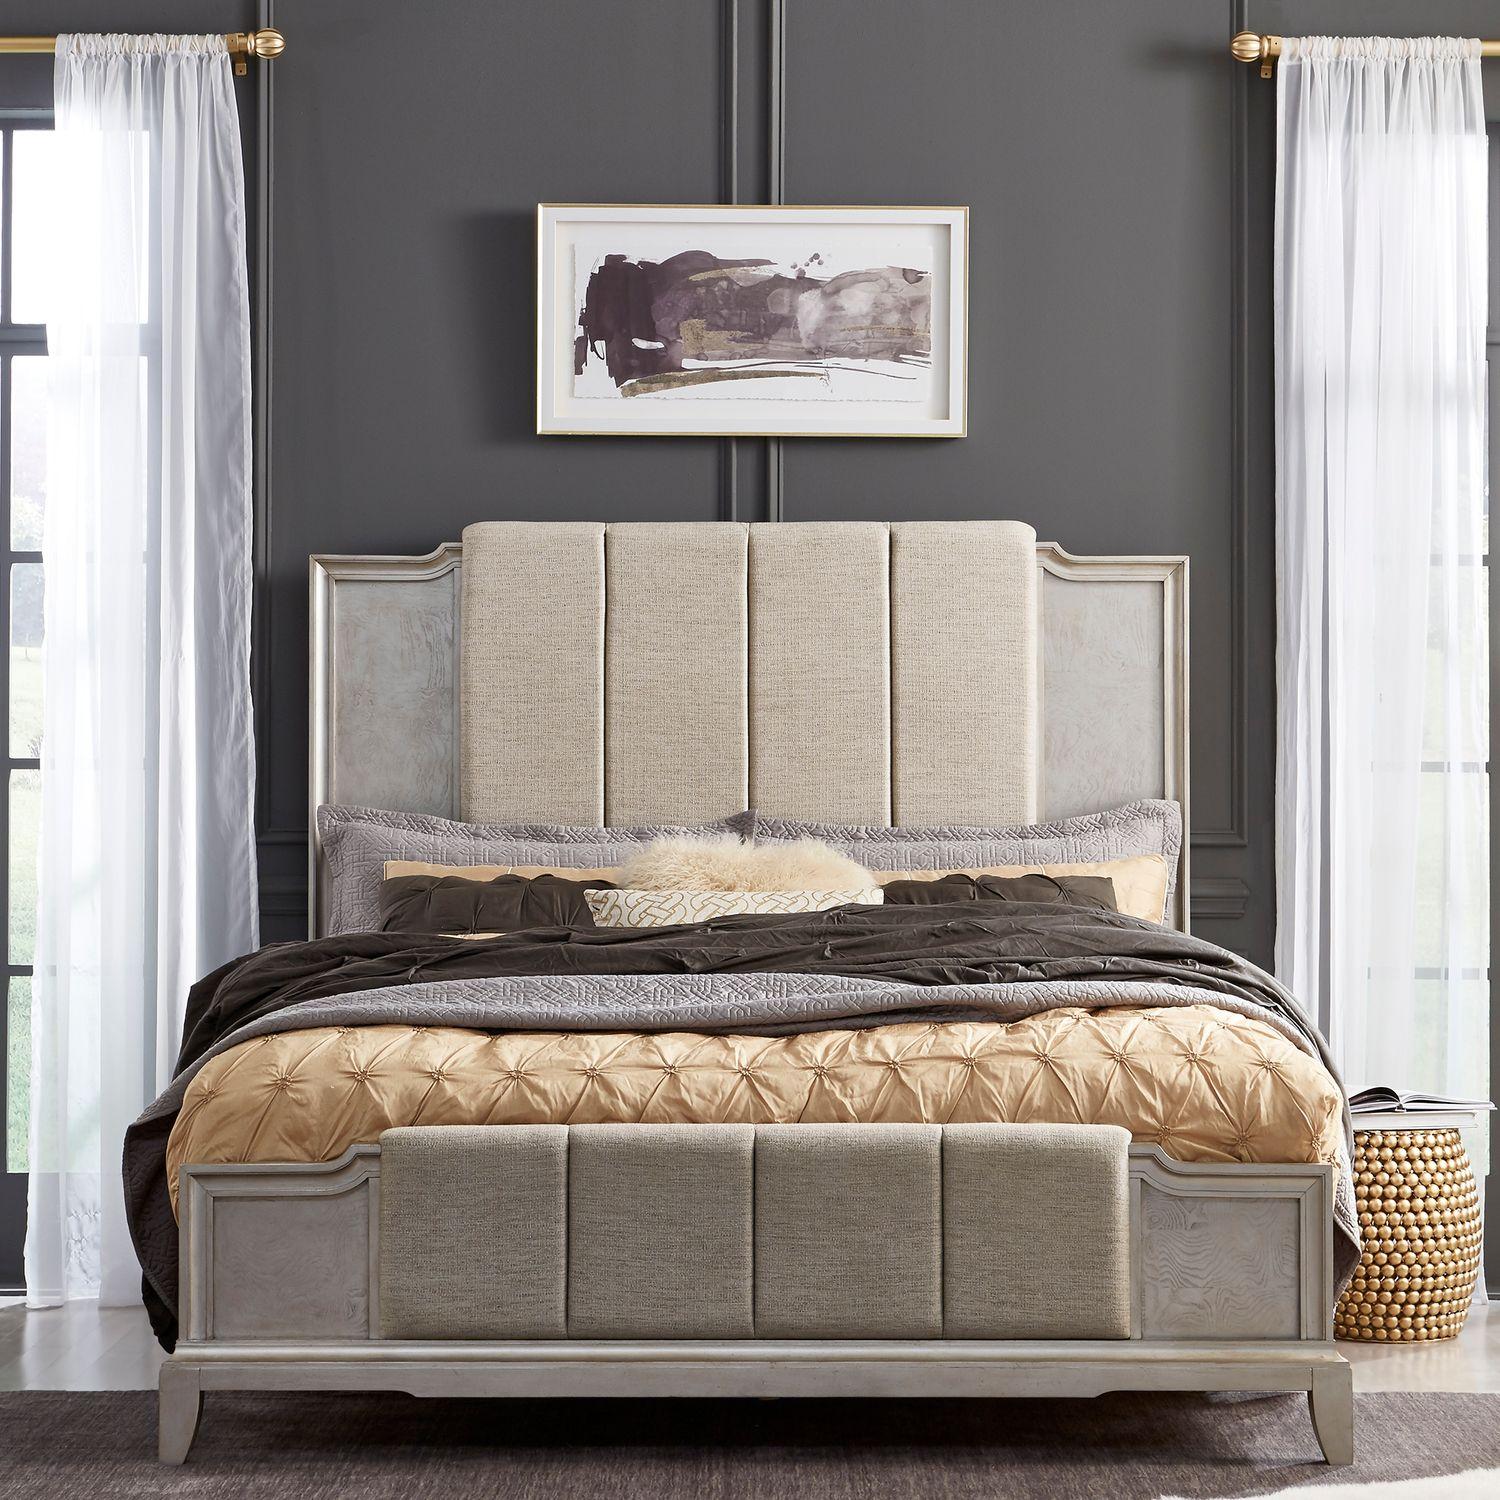 Modern Upholstered Bed Montage (849-BR) 849-BR-QUB in Platinum Fabric